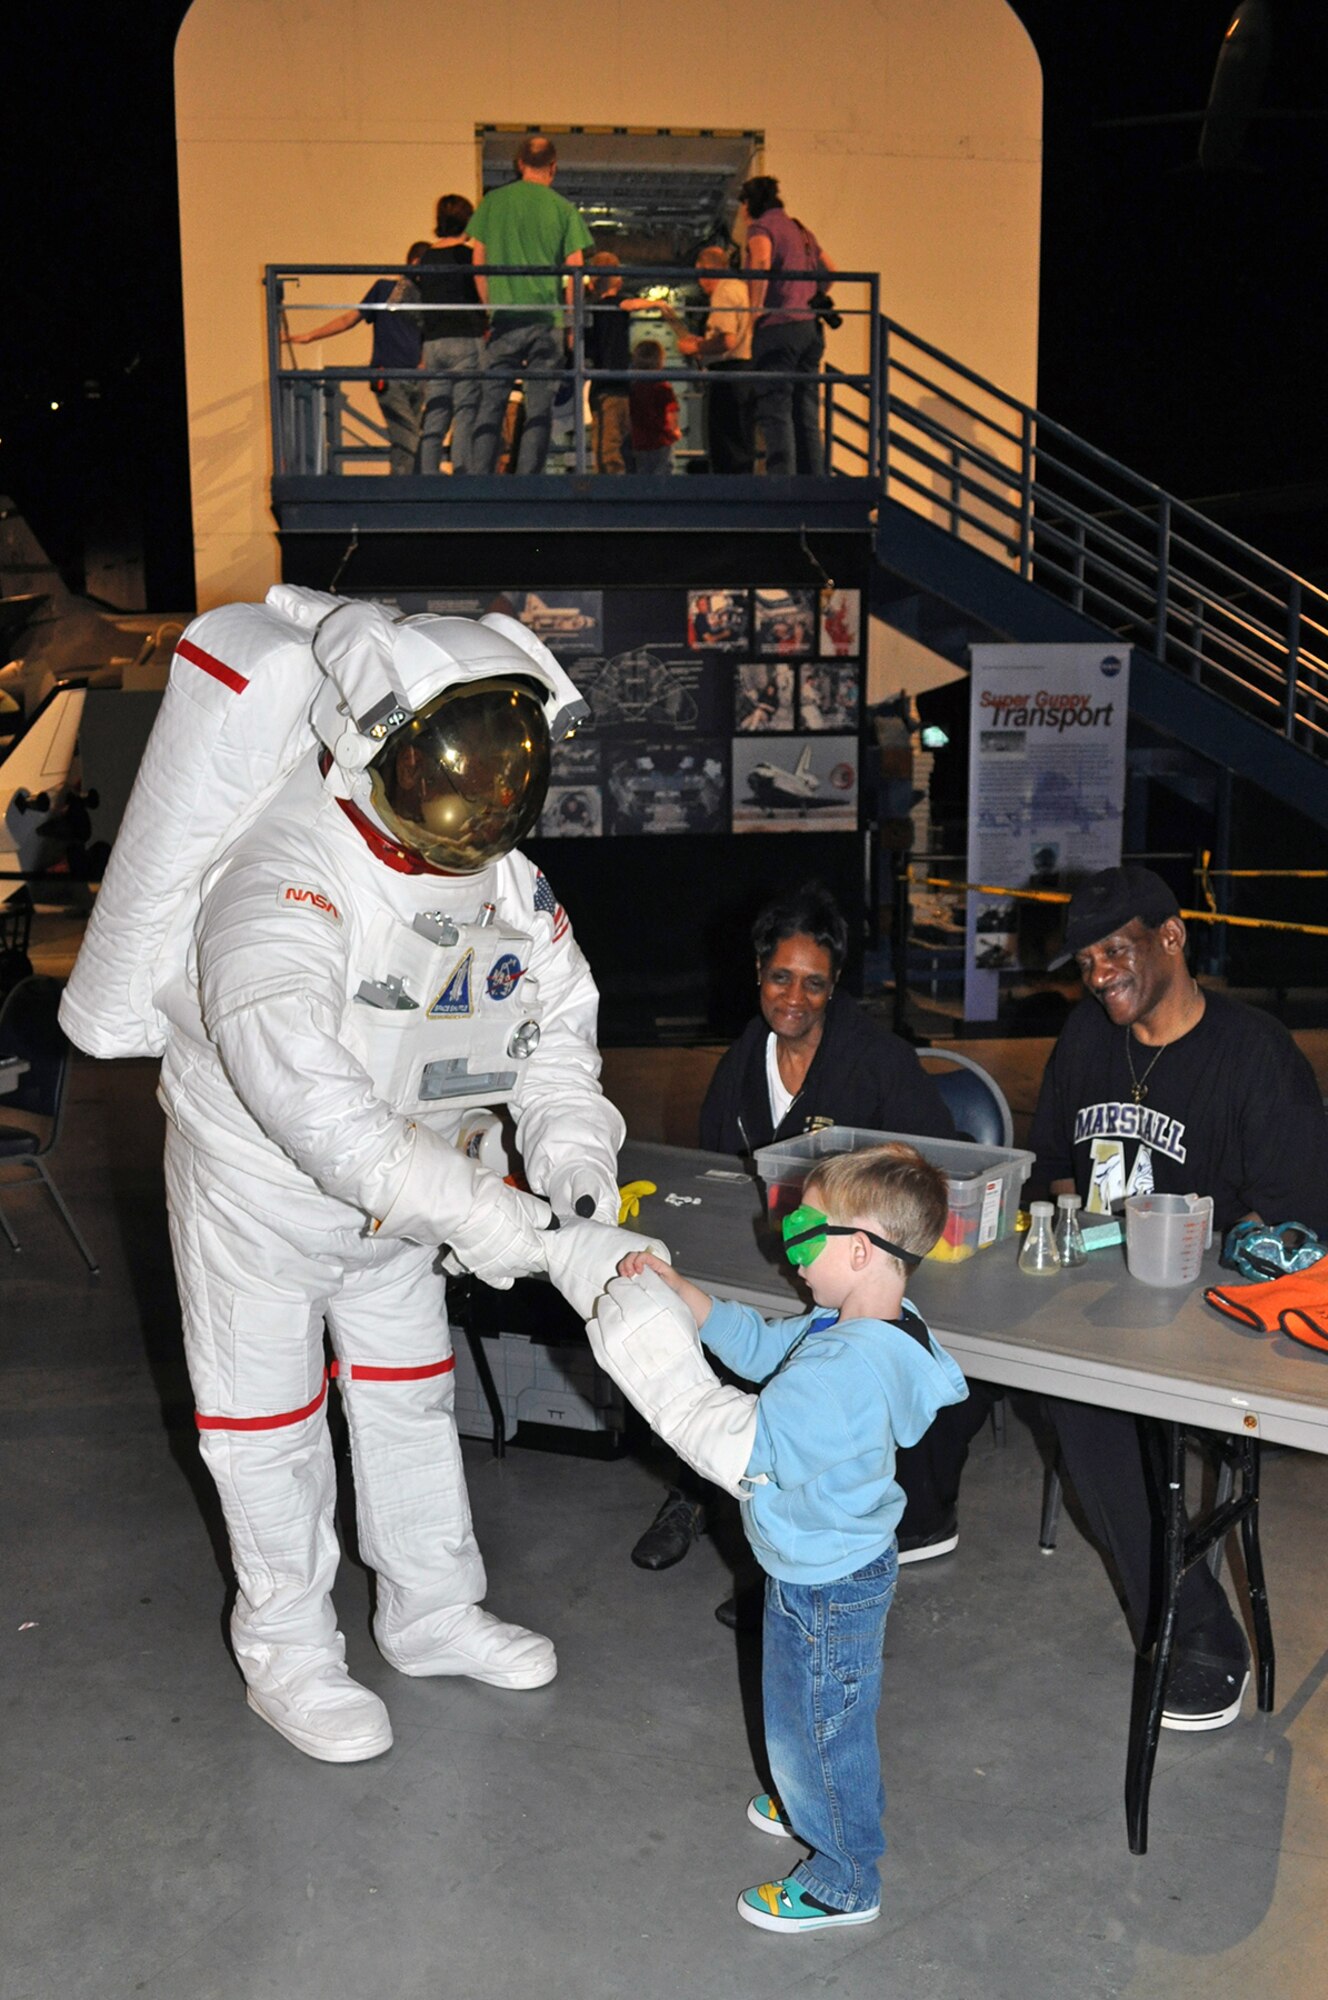 DAYTON, Ohio (05/2013) -- A young visitor gets a little help from an astronaut during Space Fest on May 4 at the National Museum of the U.S. Air Force. (U.S. Air Force photo by Garry Guthrie)